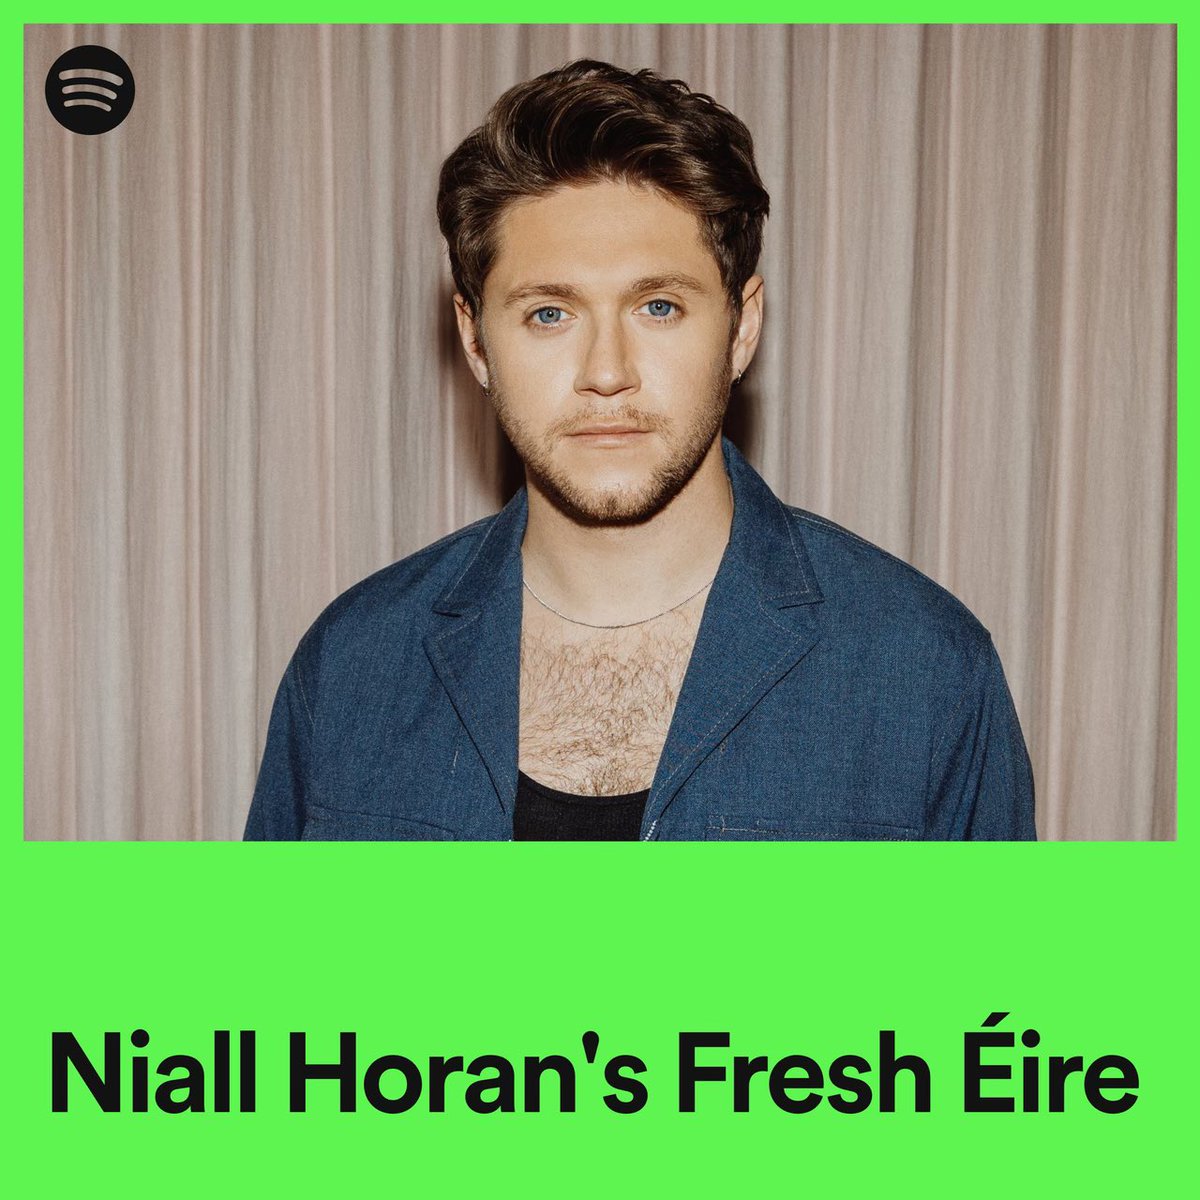 Took over @Spotify’s A Breath Of Fresh Éire playlist to highlight some of my favourite new Irish artists 🇮🇪 open.spotify.com/playlist/37i9d…